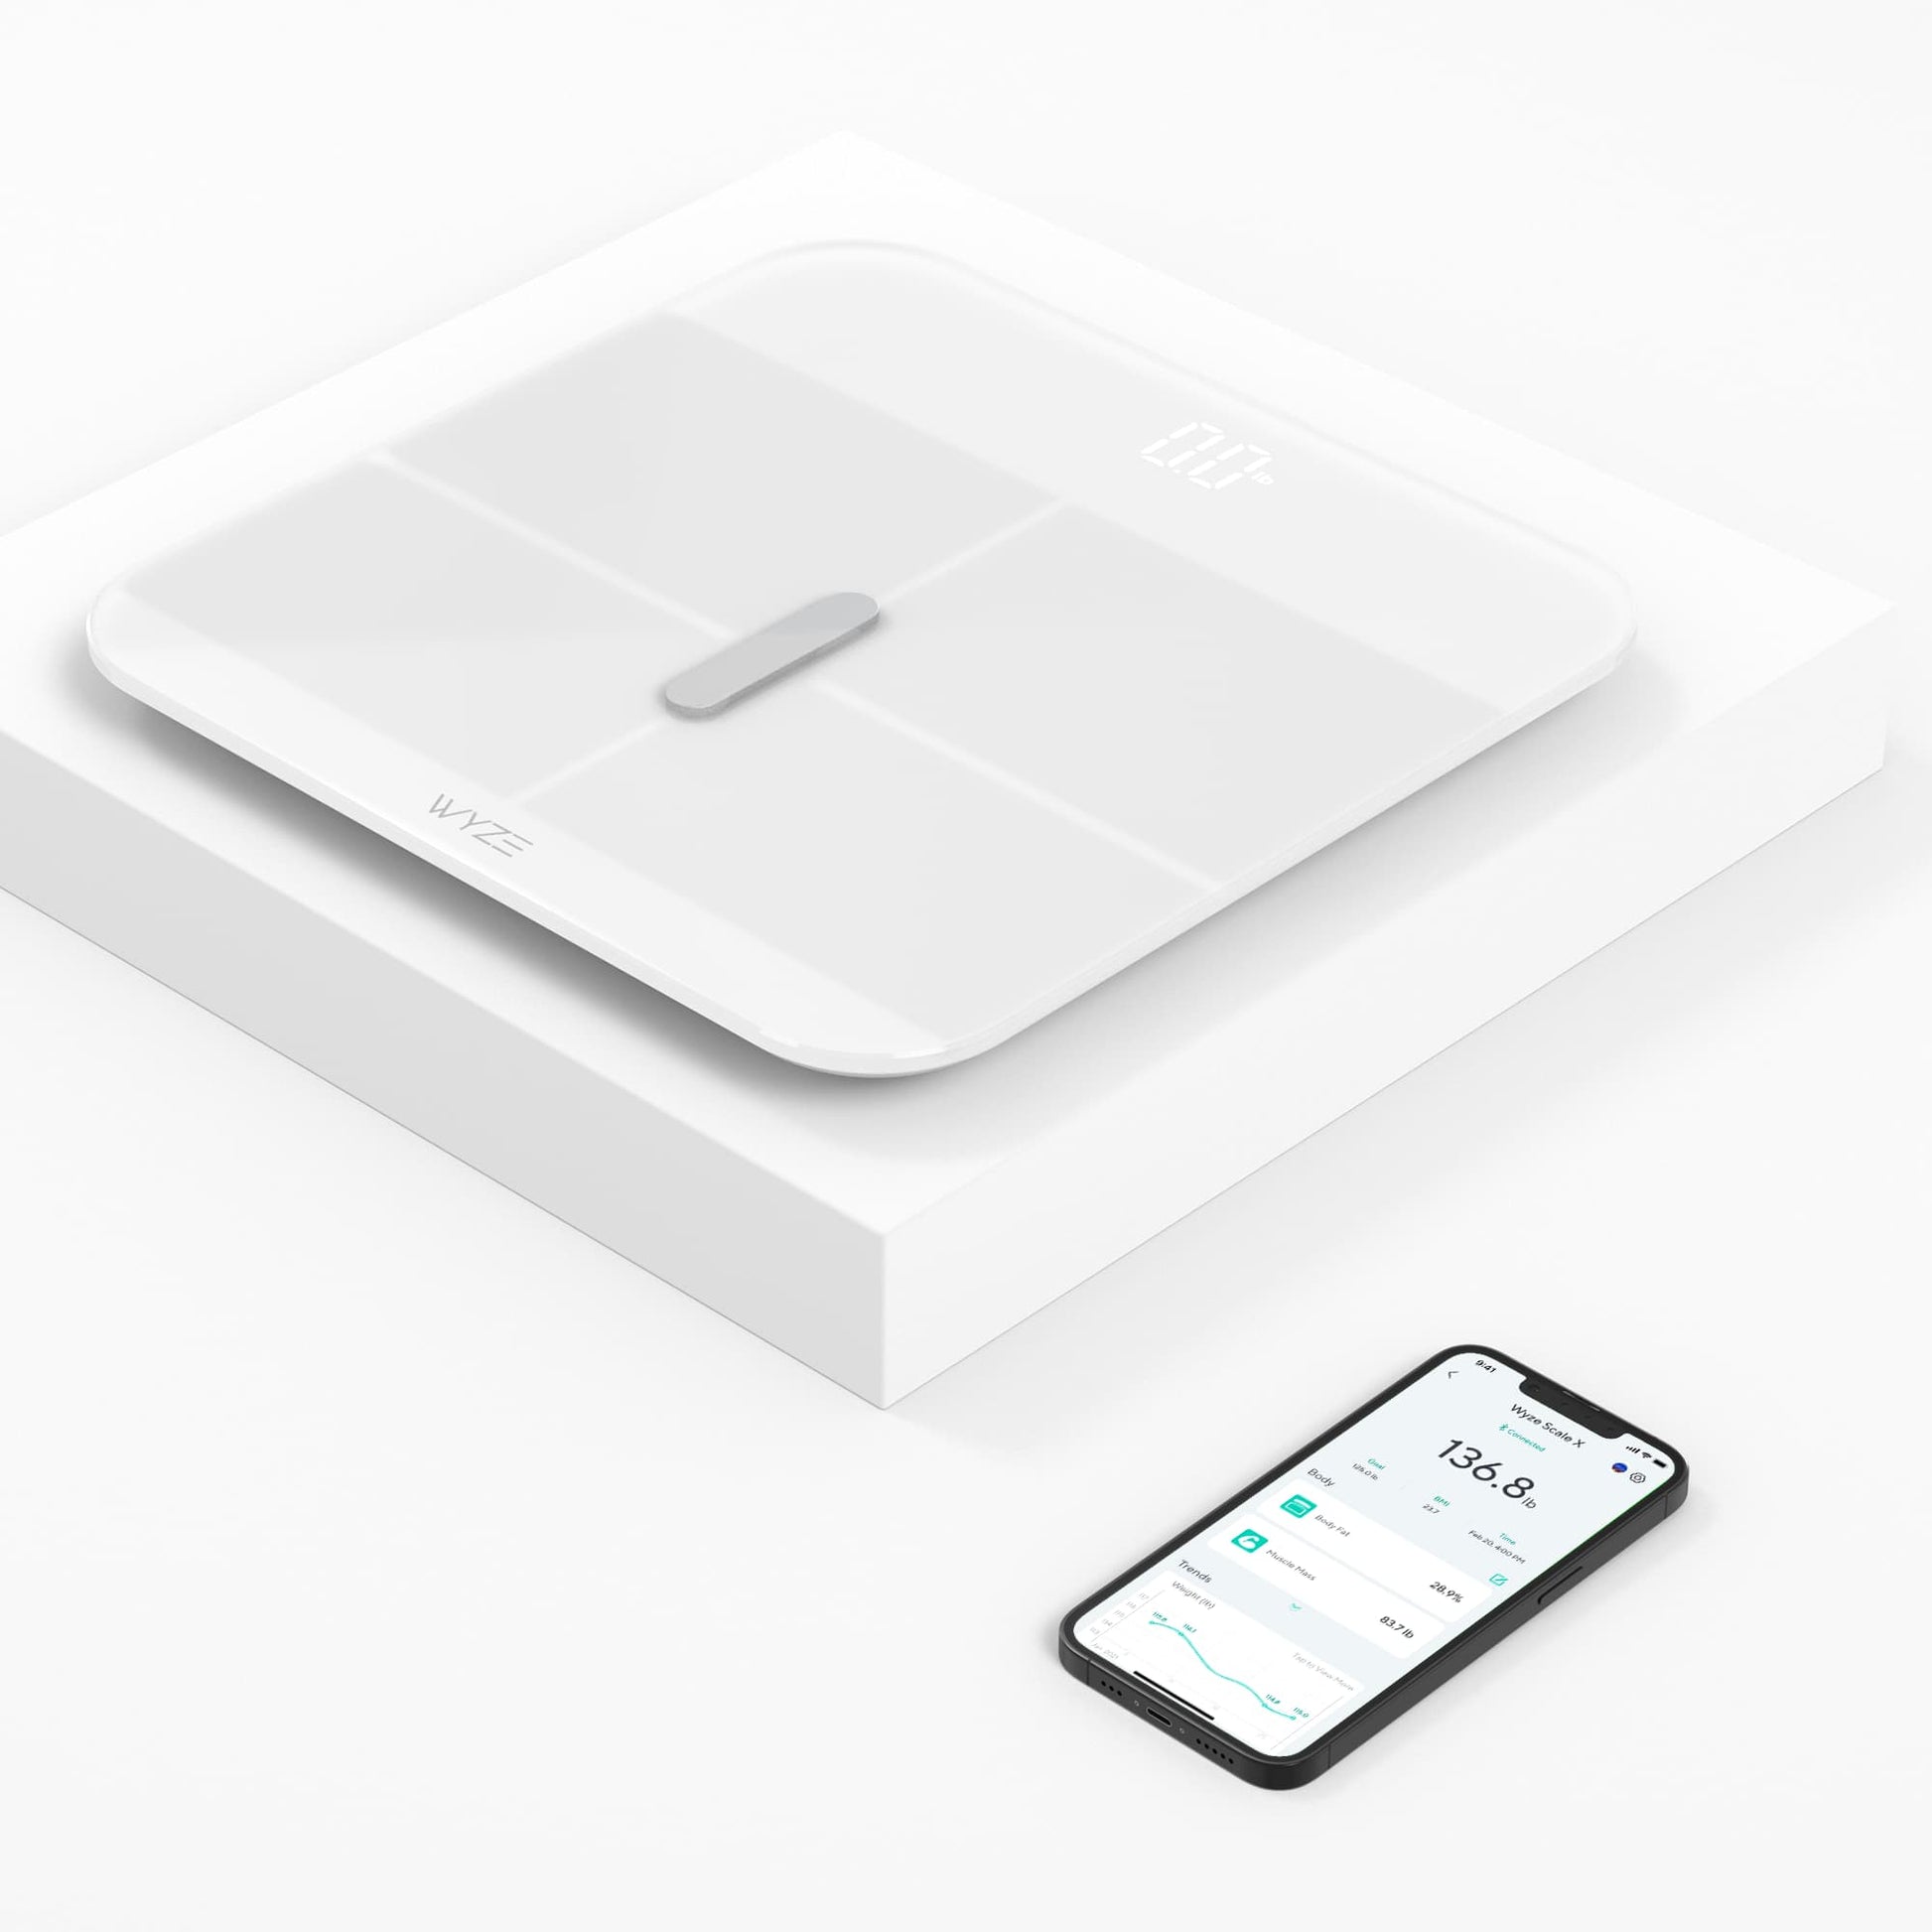 Wyze's new smart scale features modes for babies, pets, and luggage - The  Verge